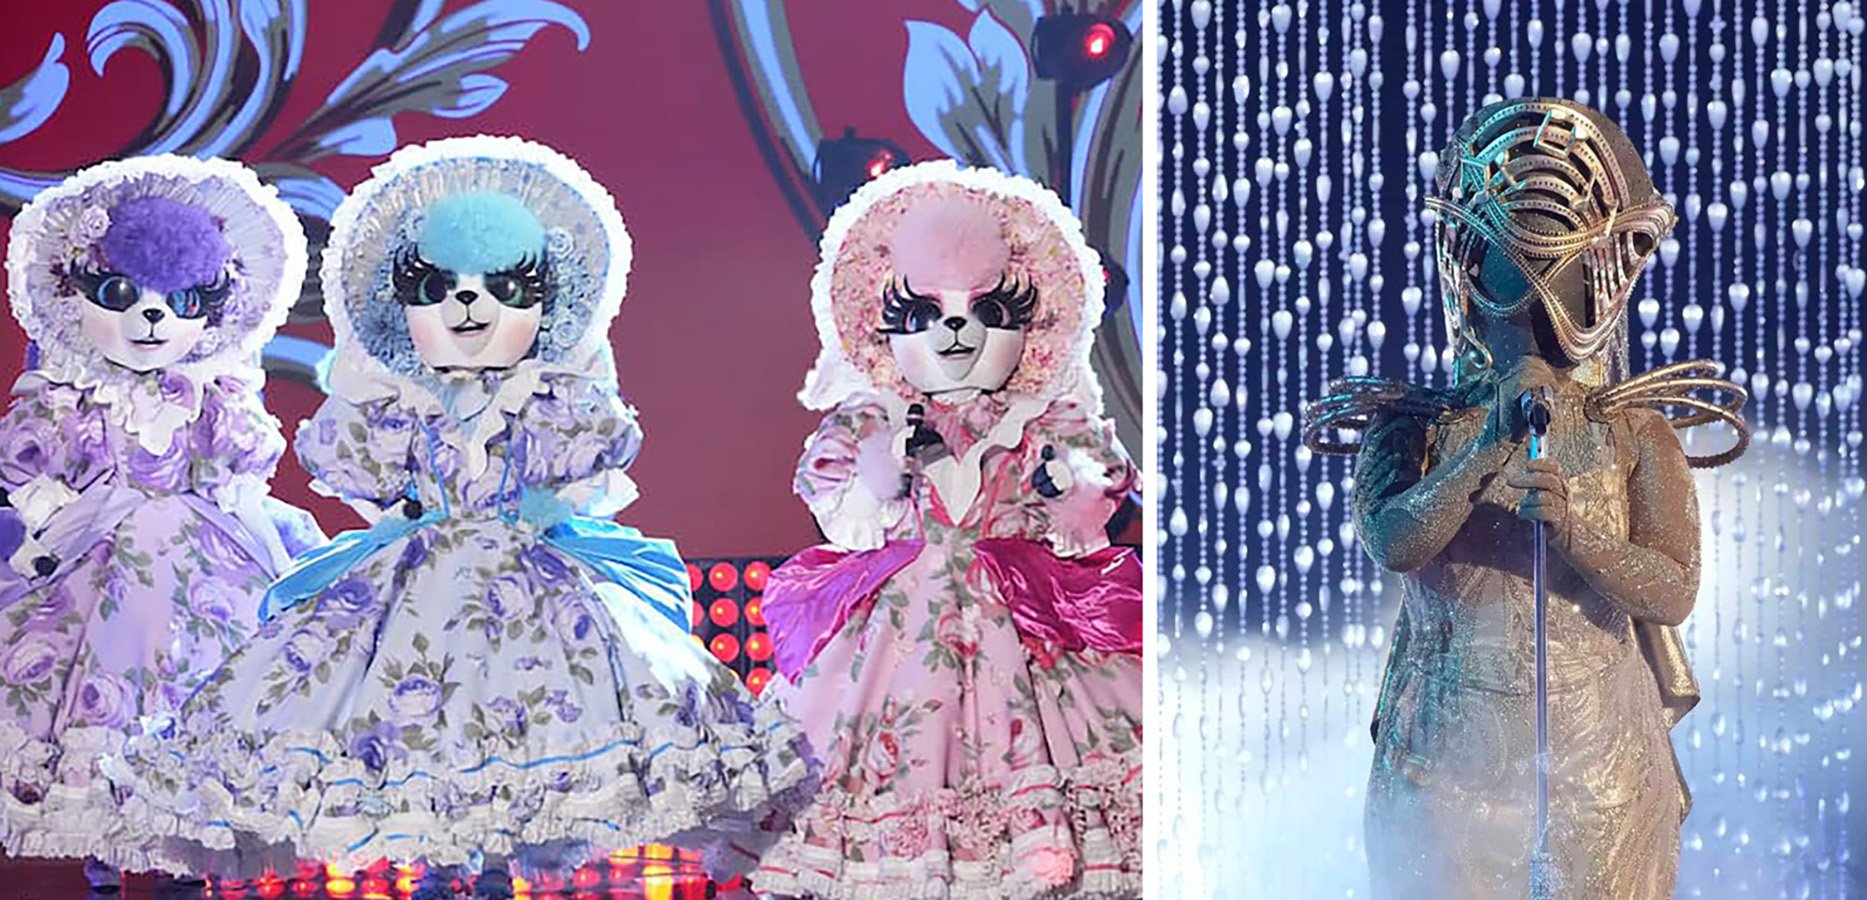 The Masked Singer Season 8 finale masks: Left image shows the Lambs standing side by side on The Masked Singer. Right Image shows Harp mid-performance on The Masked Singer.